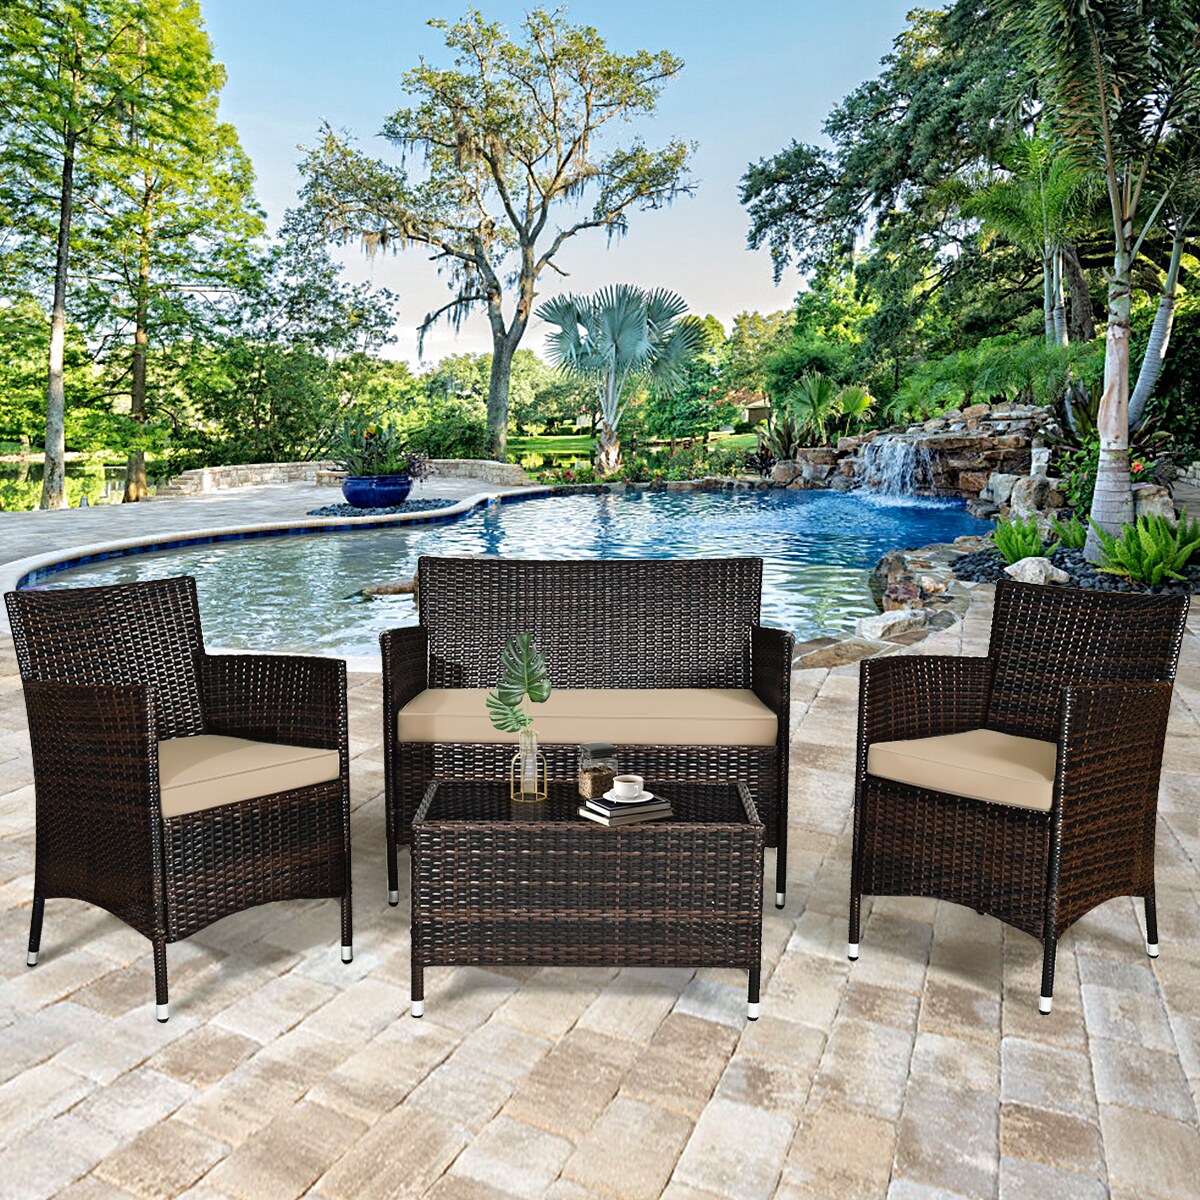 Gymax 4 Pieces Patio Rattan Conversation Furniture Set Outdoor w/ Brown and Turquoise Cushion